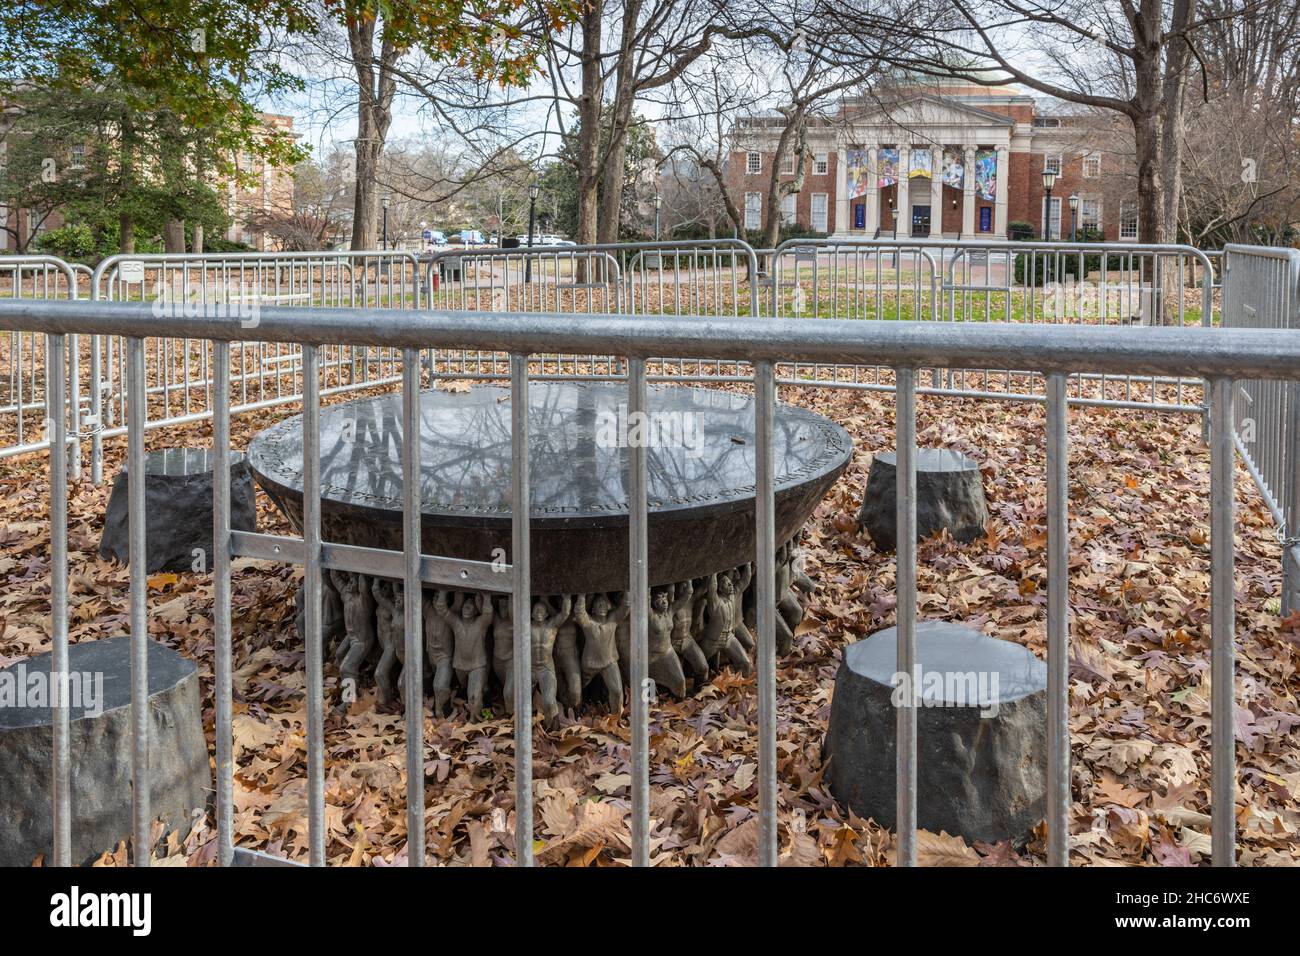 Protective  Fence Surrounding the University of North Carolina at Chapel Hill's Unsung Founders Memorial as Protection against further Vandalism Stock Photo